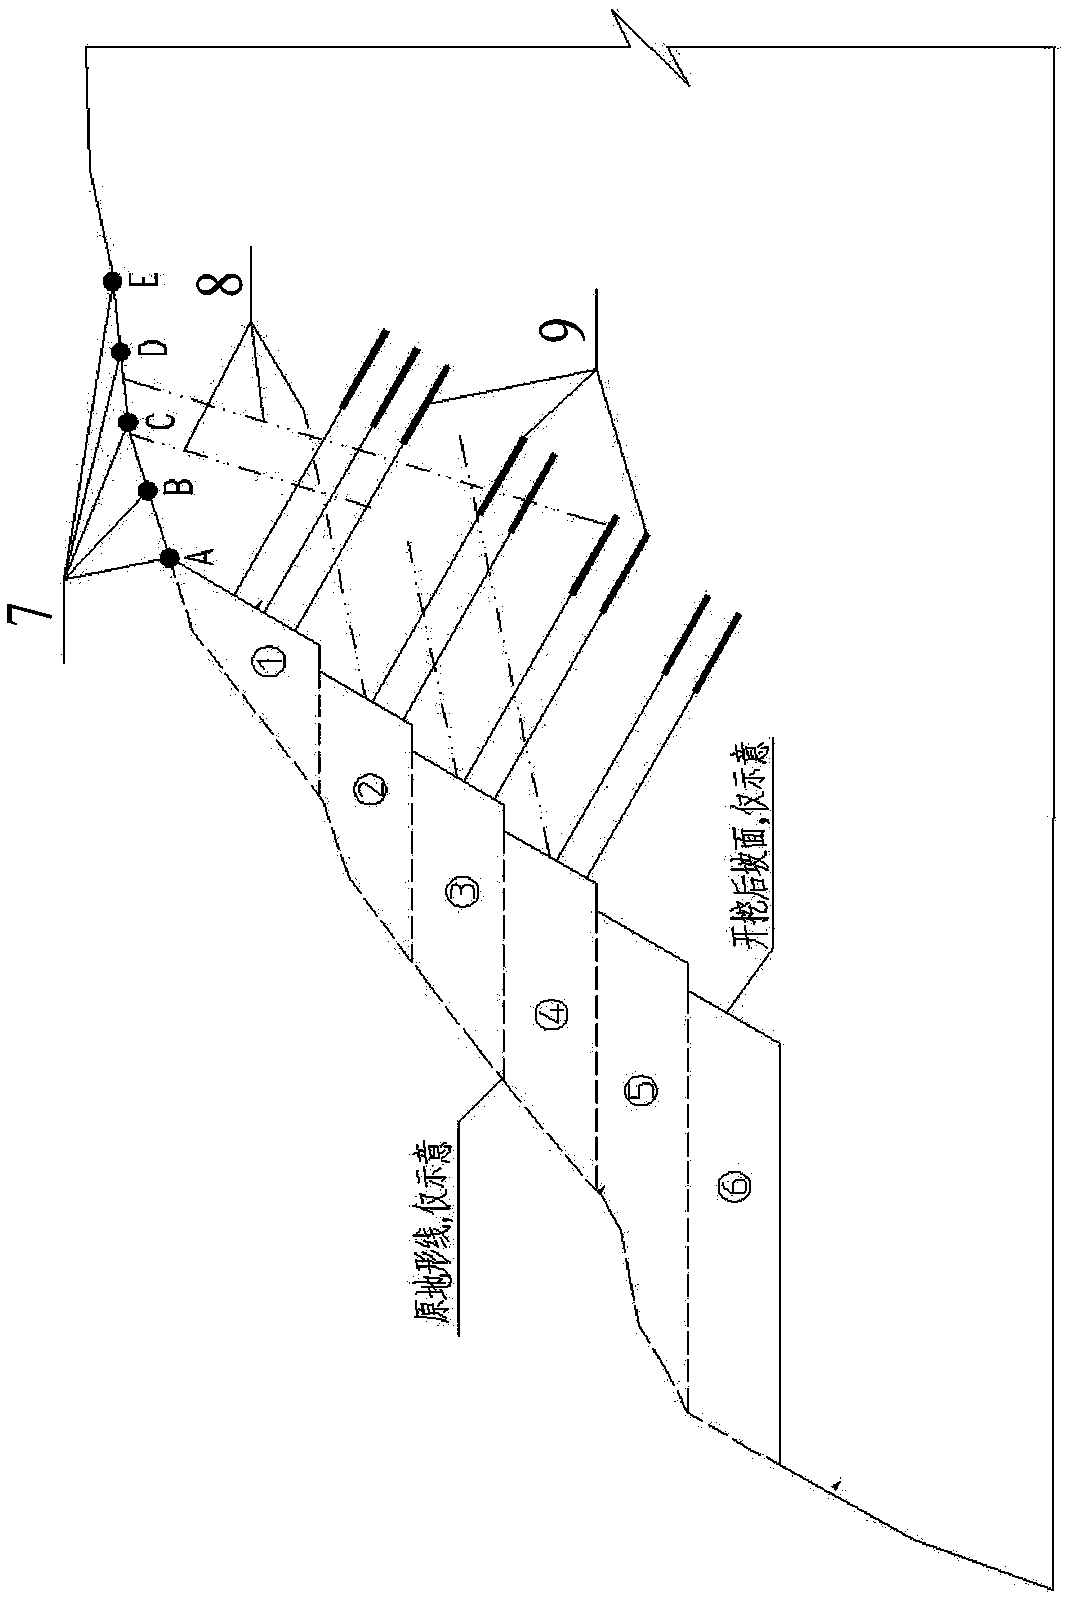 Dynamic feedback analysis and optimization design method for fissure rock slope based on monitoring information